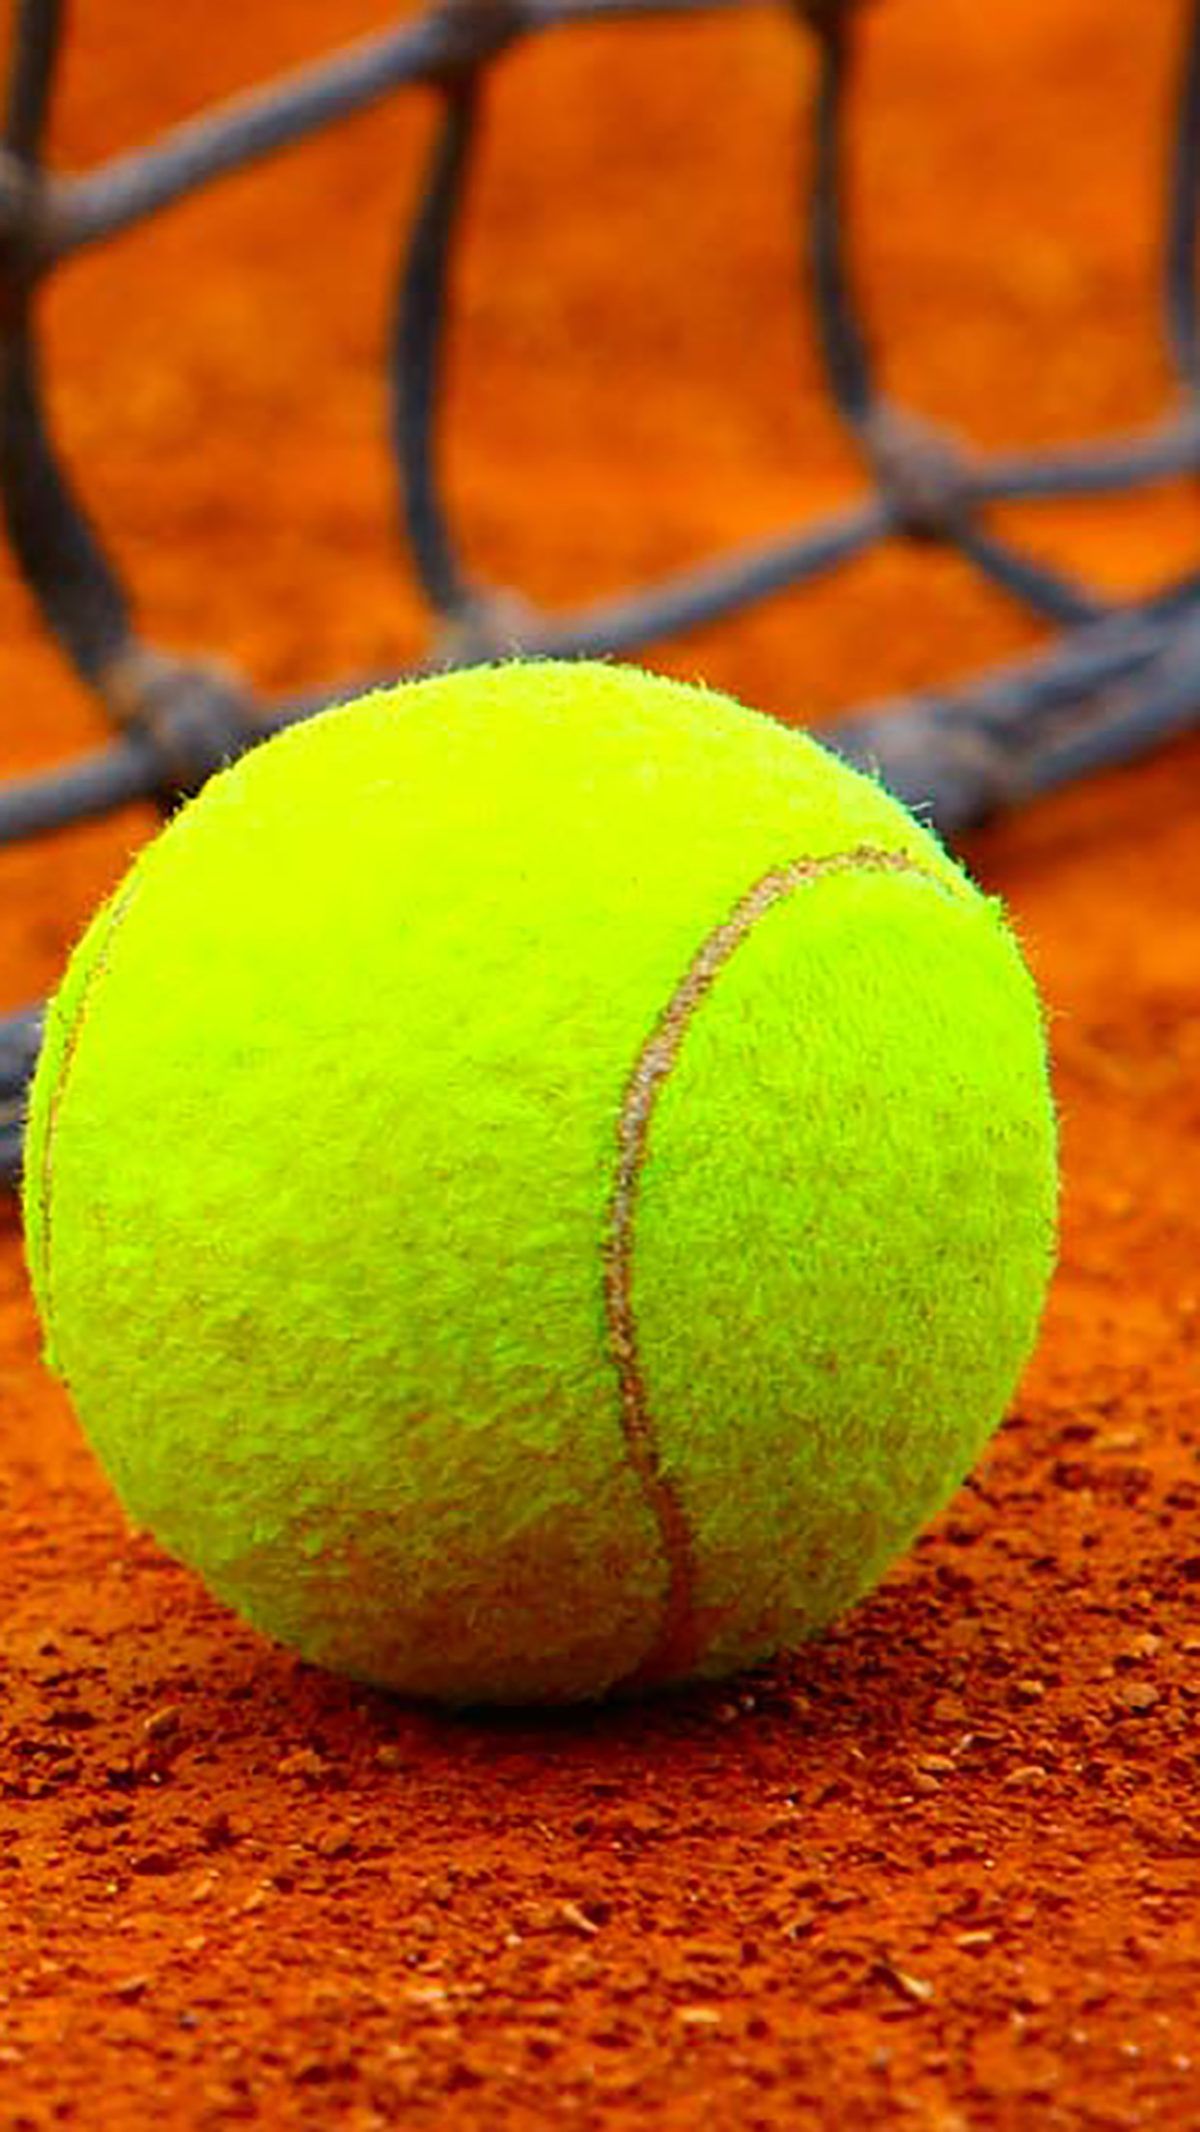 Tennis-Ball-On-The-Ground-3Wallpapers-iPhone-Parallax